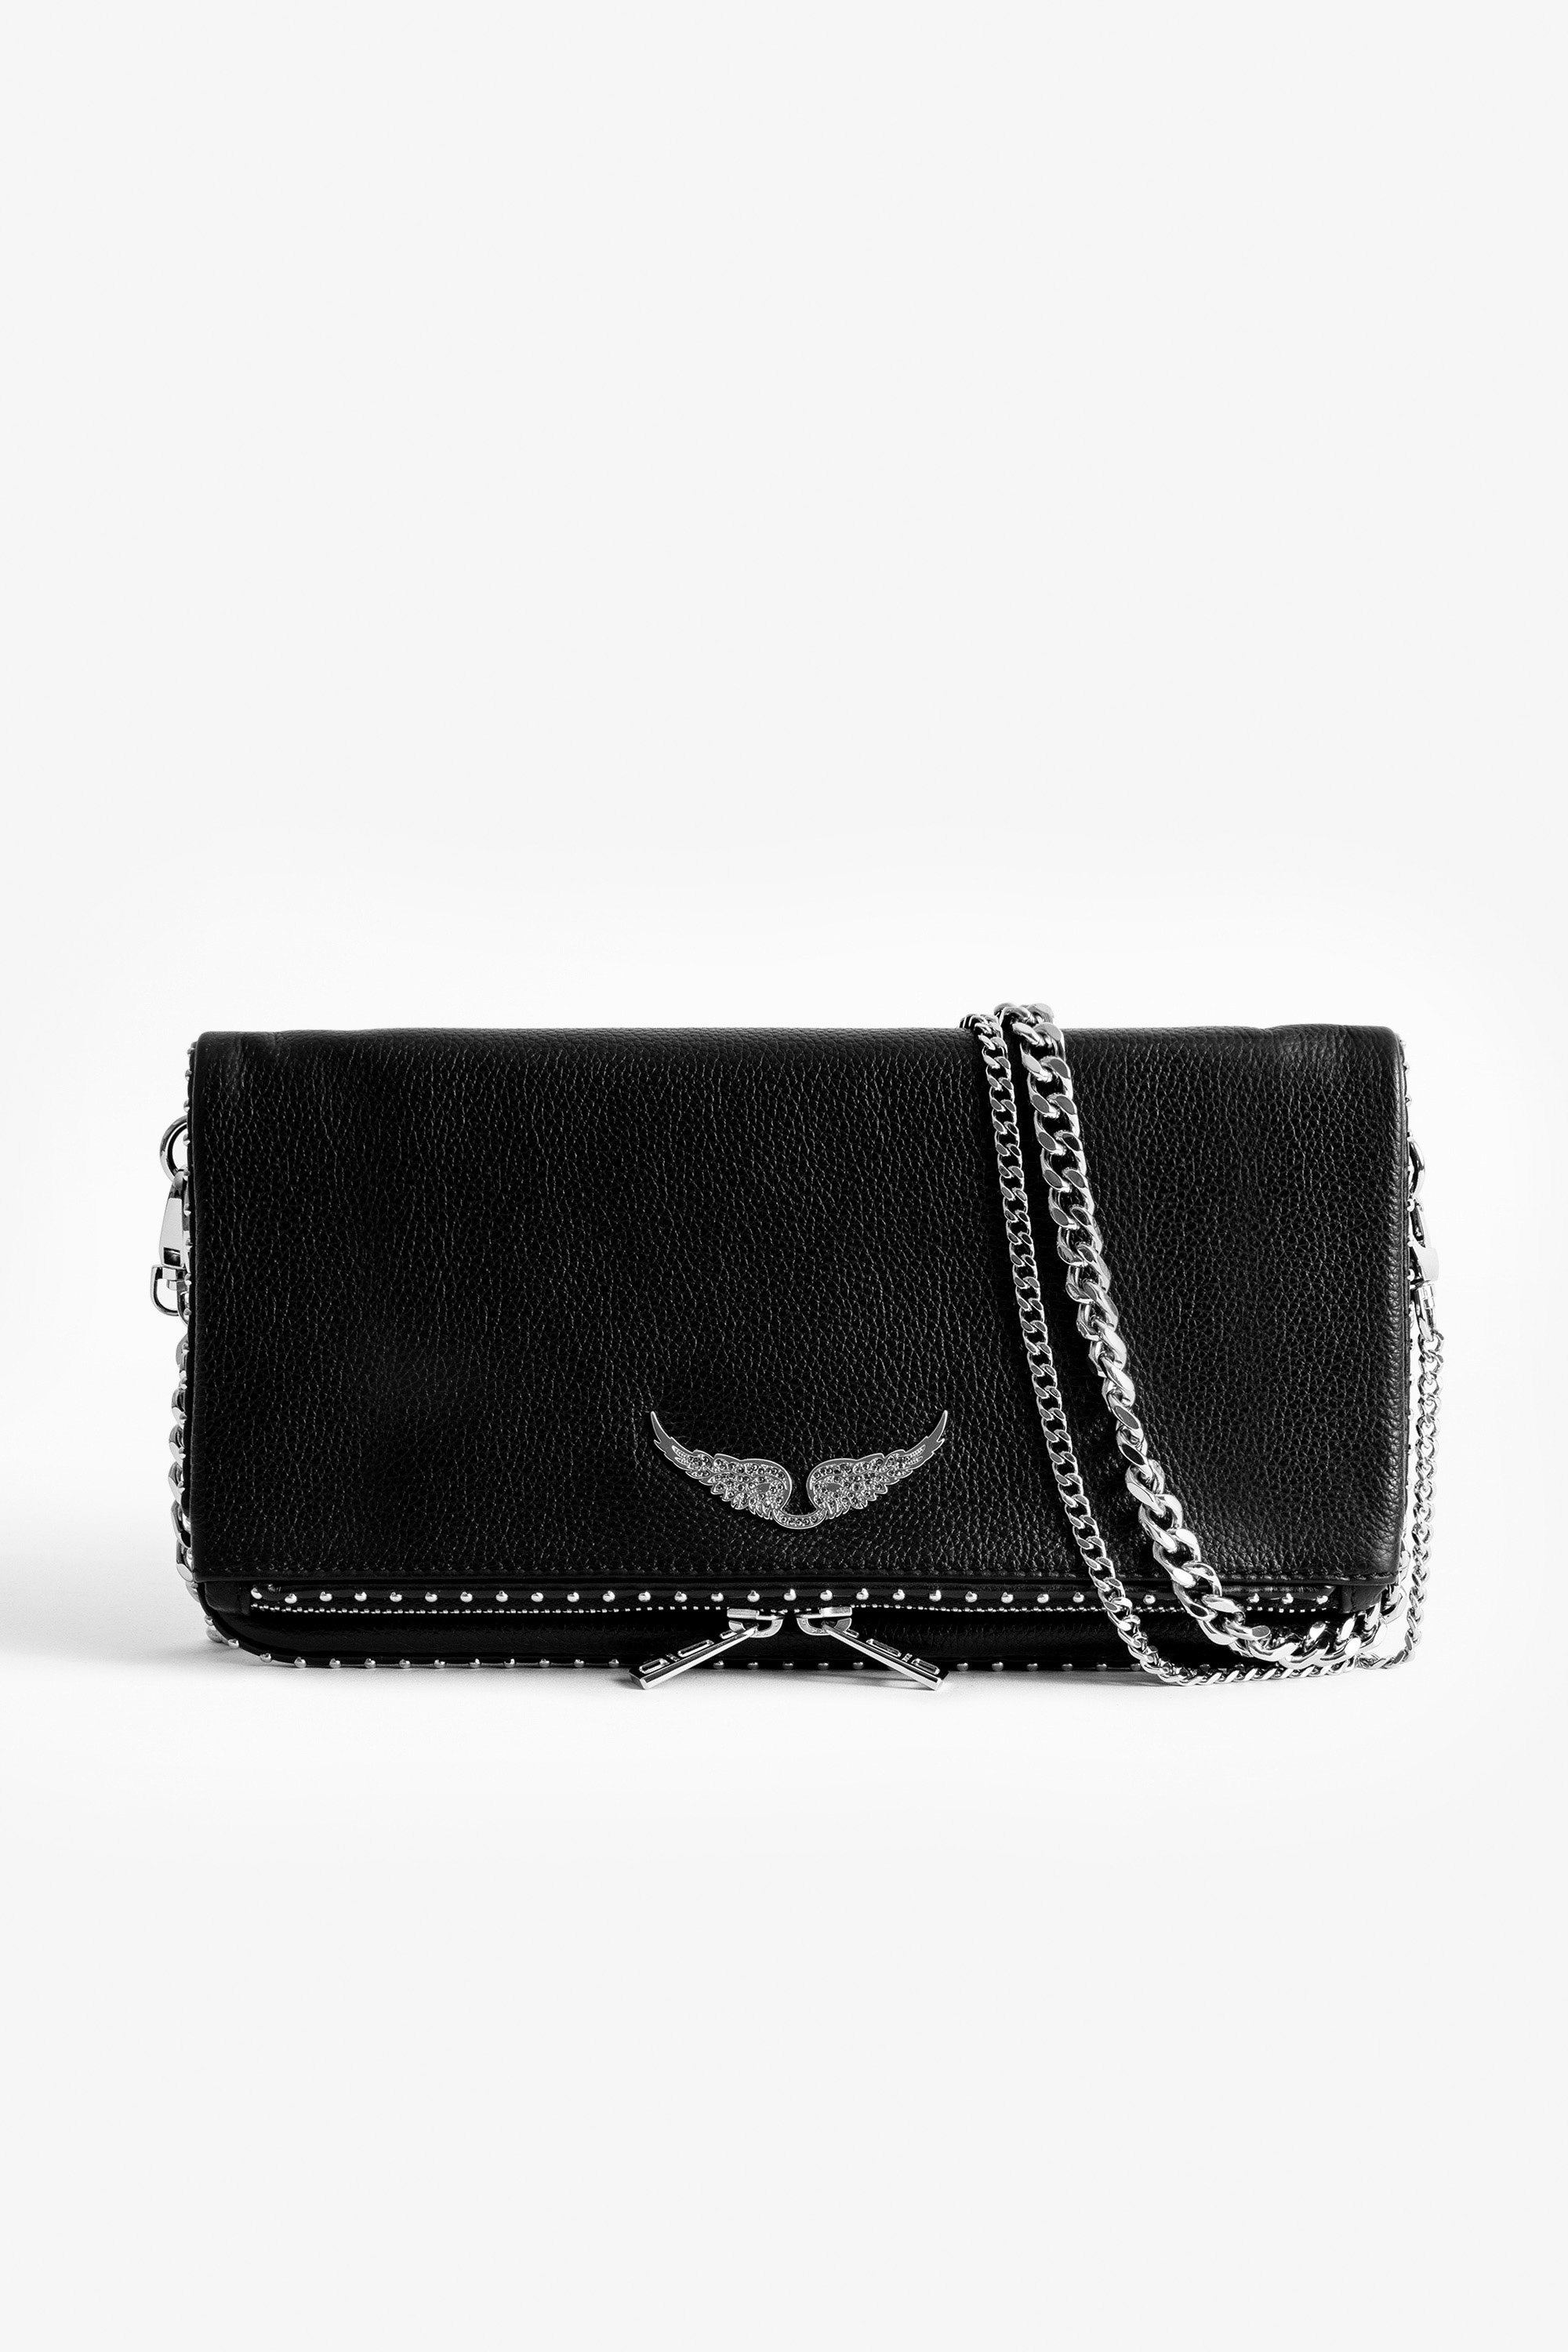 Rock Studs Clutch Rock iconic women’s studded black grained leather clutch.